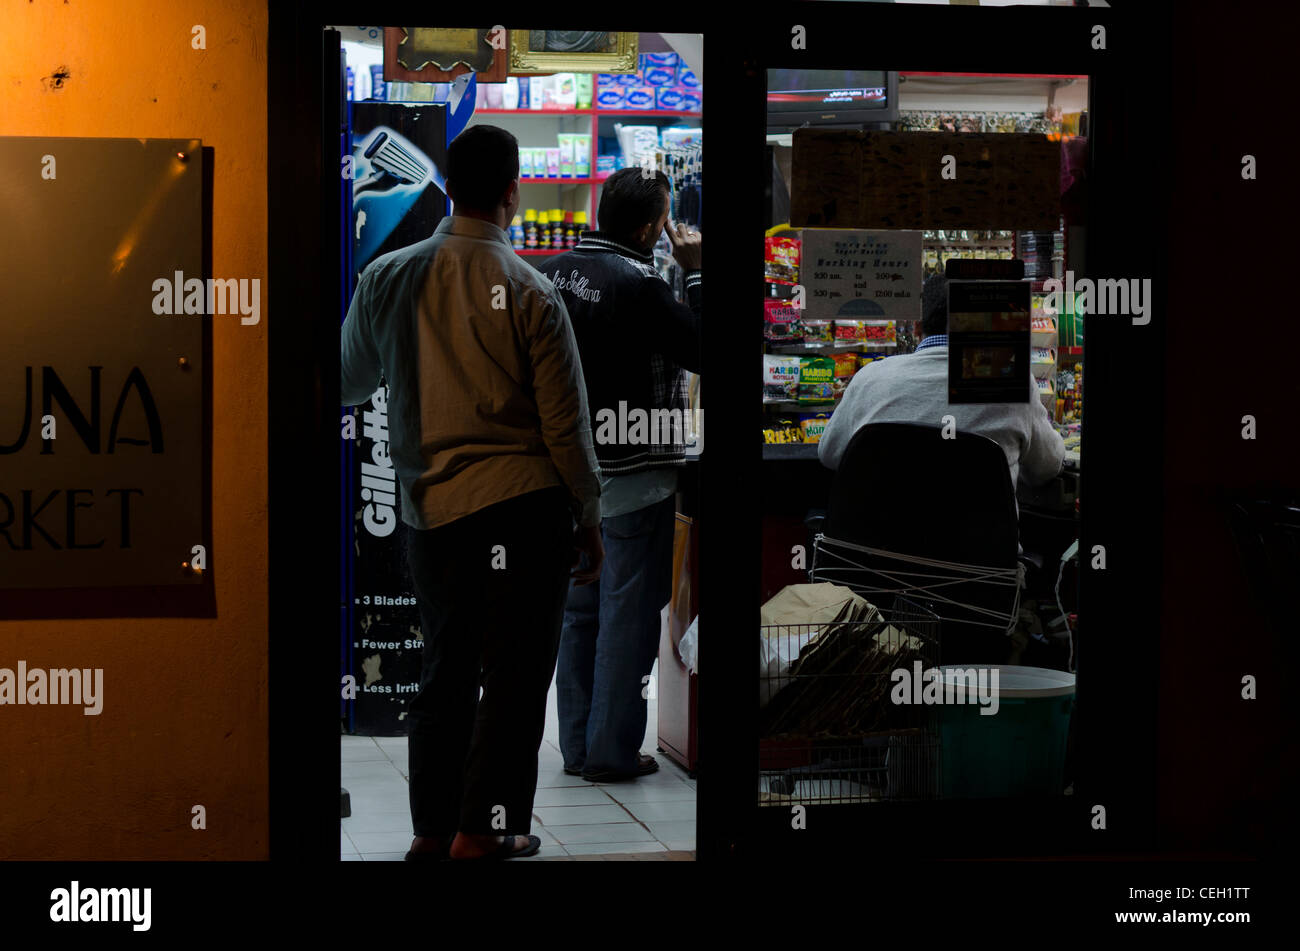 People in minimarket watching tv late at night Stock Photo